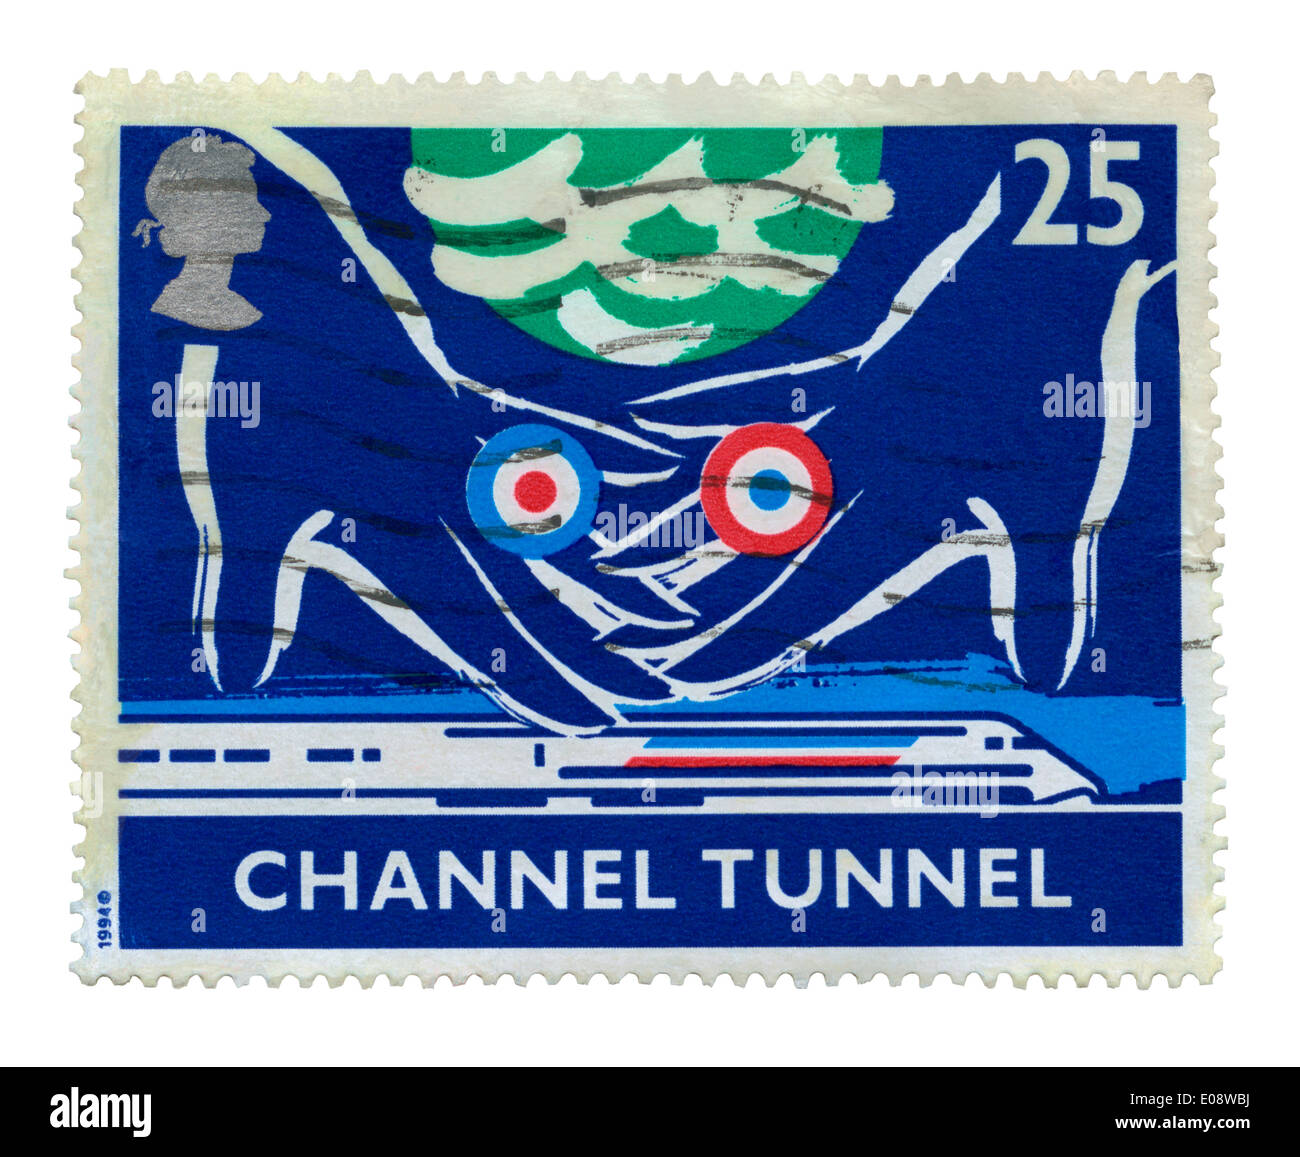 UK postage stamp commemorating the opening of the Channel Tunnel in 1994 Stock Photo